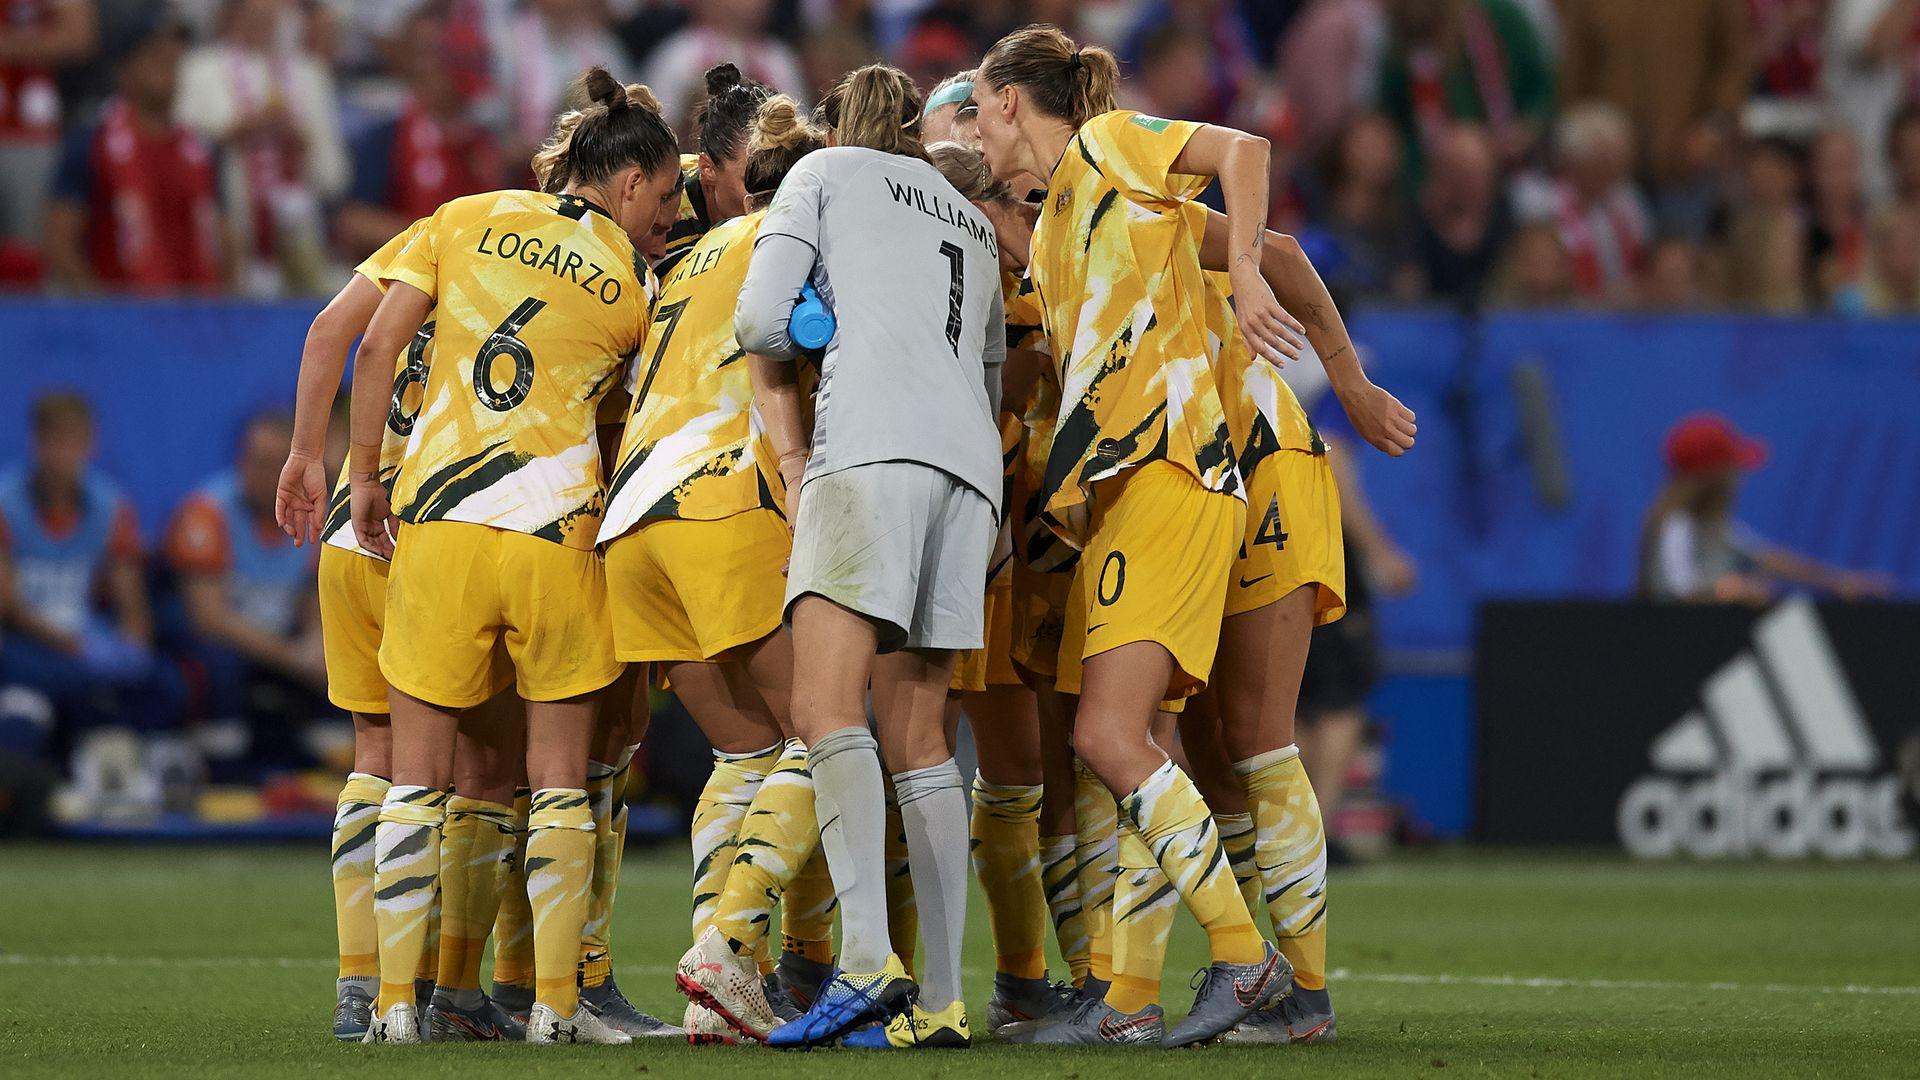 Australia women's soccer players to get equal pay after historic